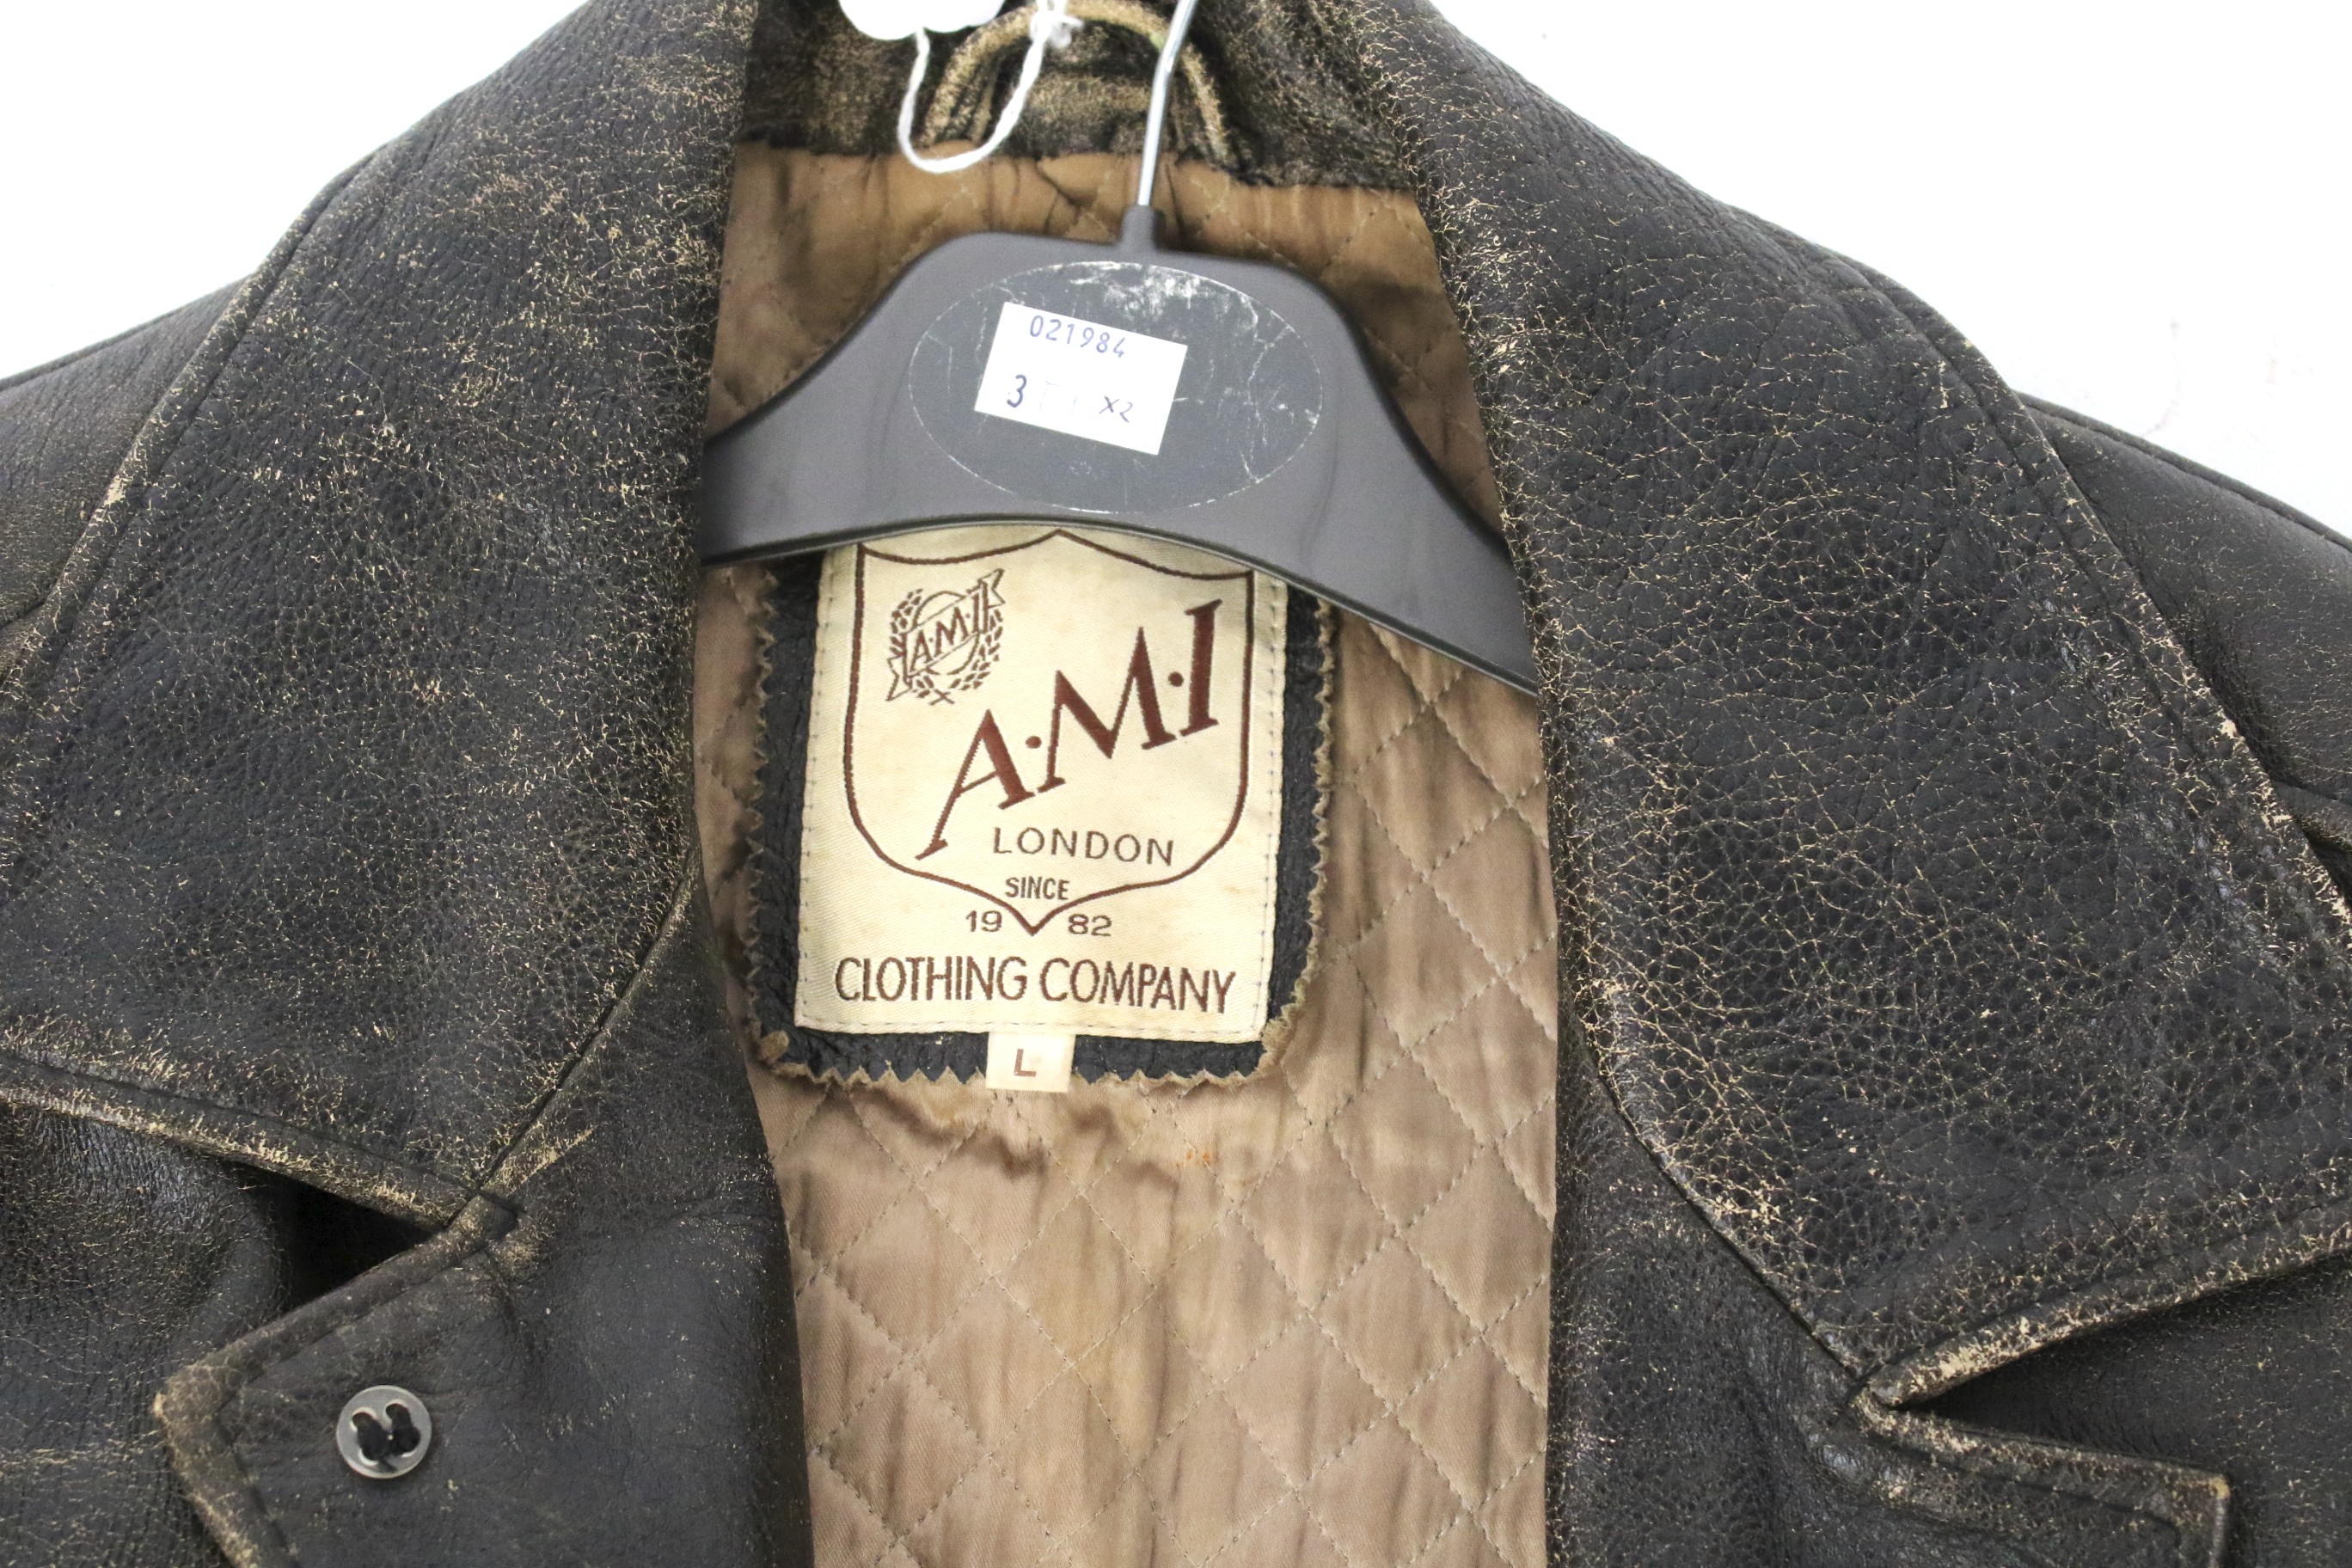 A vintage leather jacket and woollen coat. The jacket by A.M.I. - Image 2 of 3